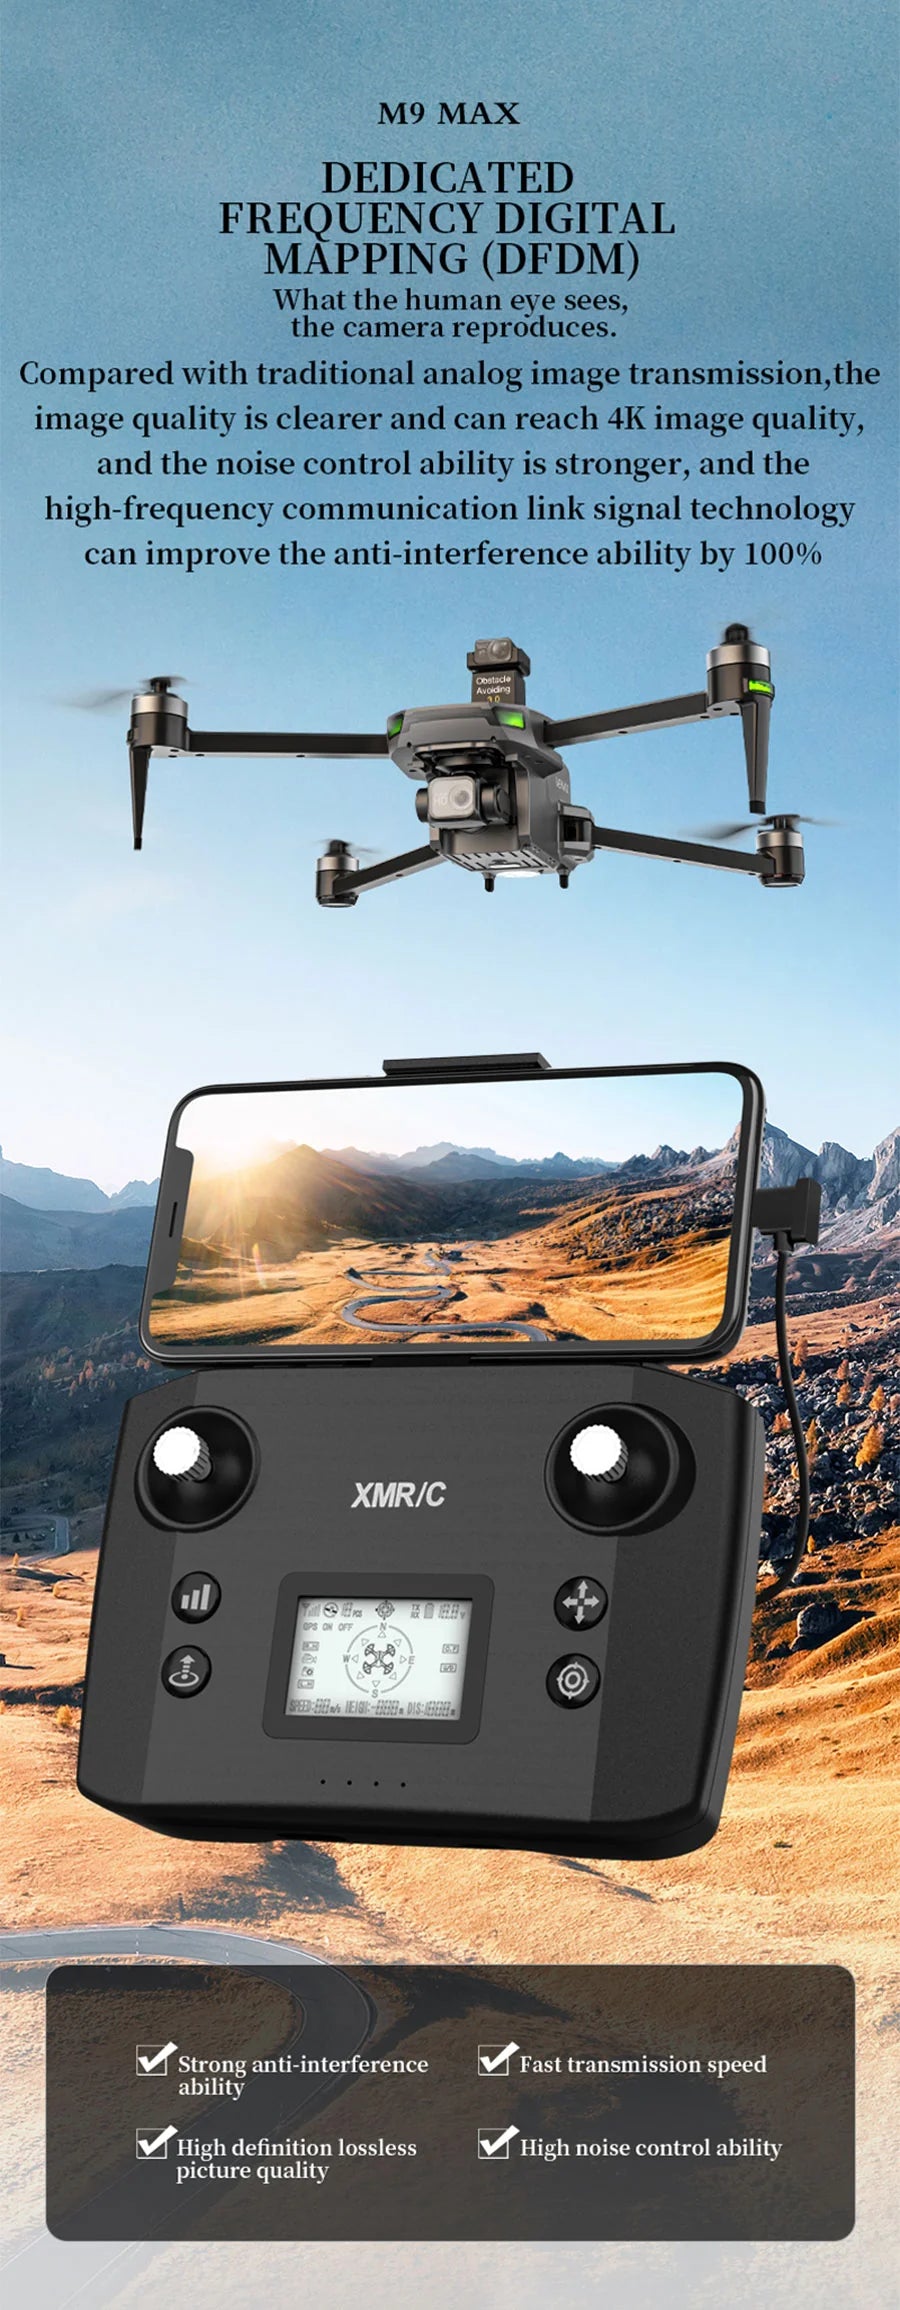 XMR/C M9 MAX Drone, M9 MAX DEDICATED FREQUENCY DIGITAL MAPPING